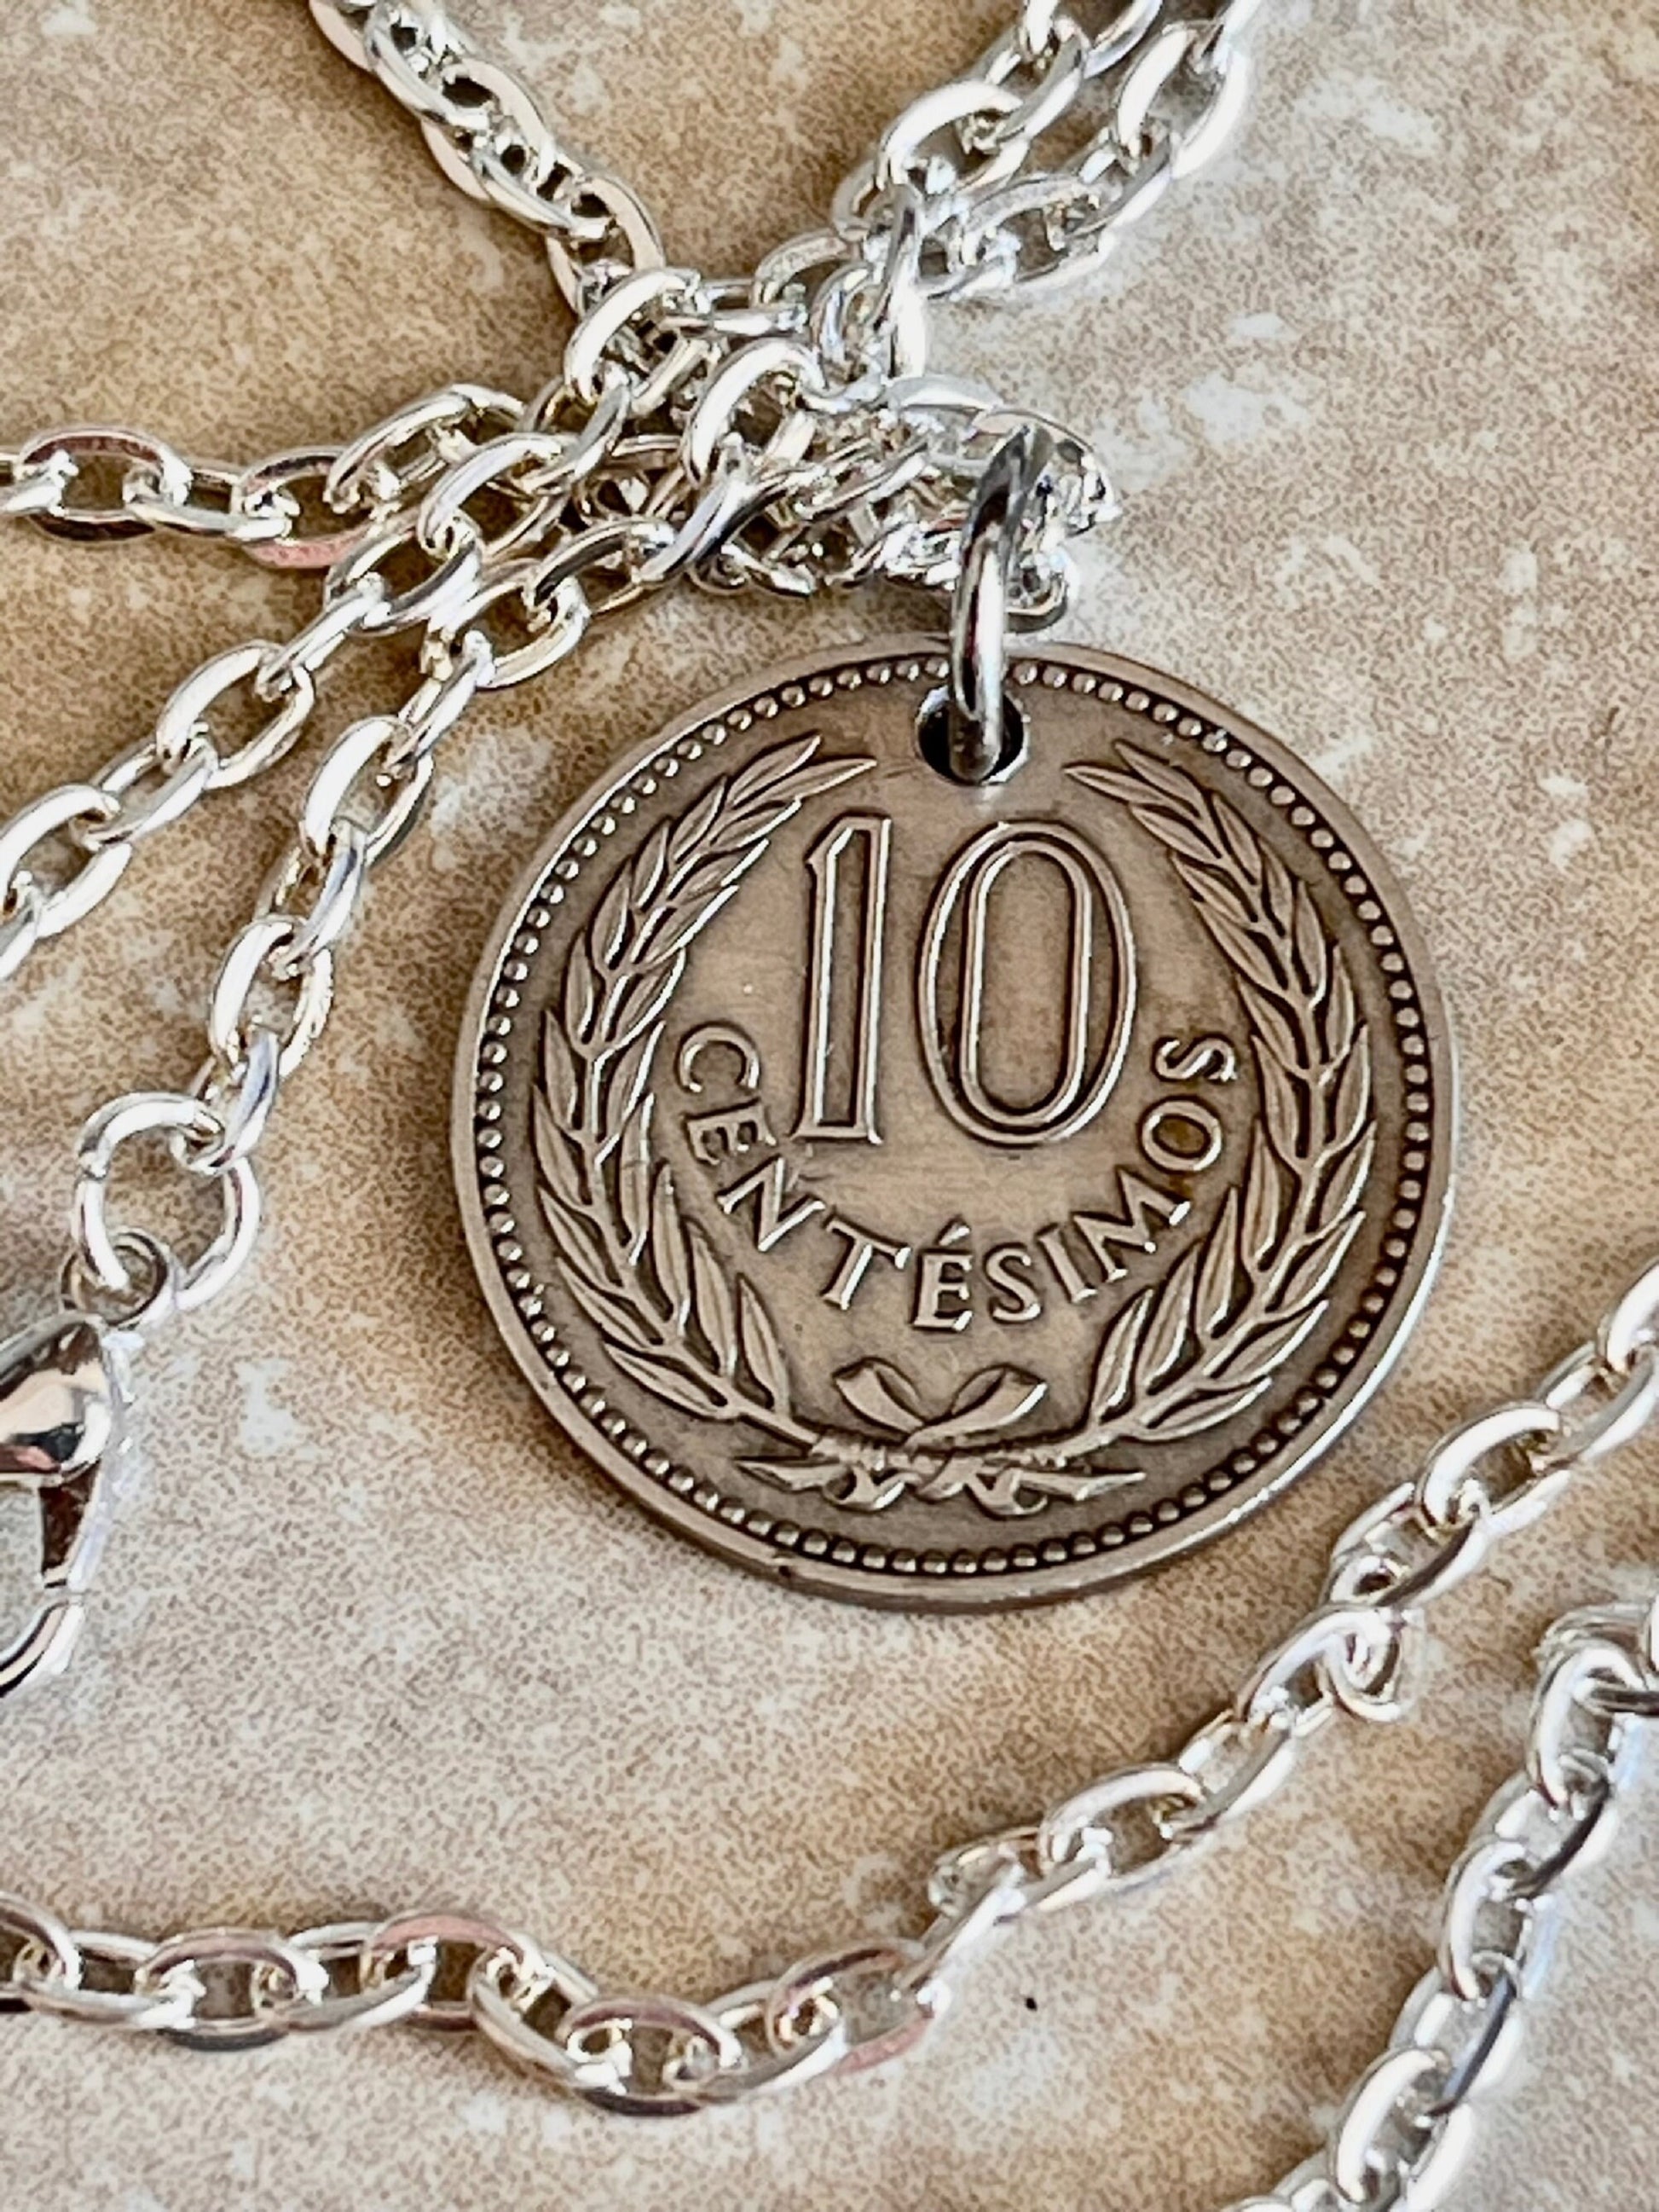 Uruguay Coin Necklace Uruguayan 10 Centimos Pendant Personal Old Vintage Handmade Jewelry Gift Friend Charm For Him Her World Coin Collector